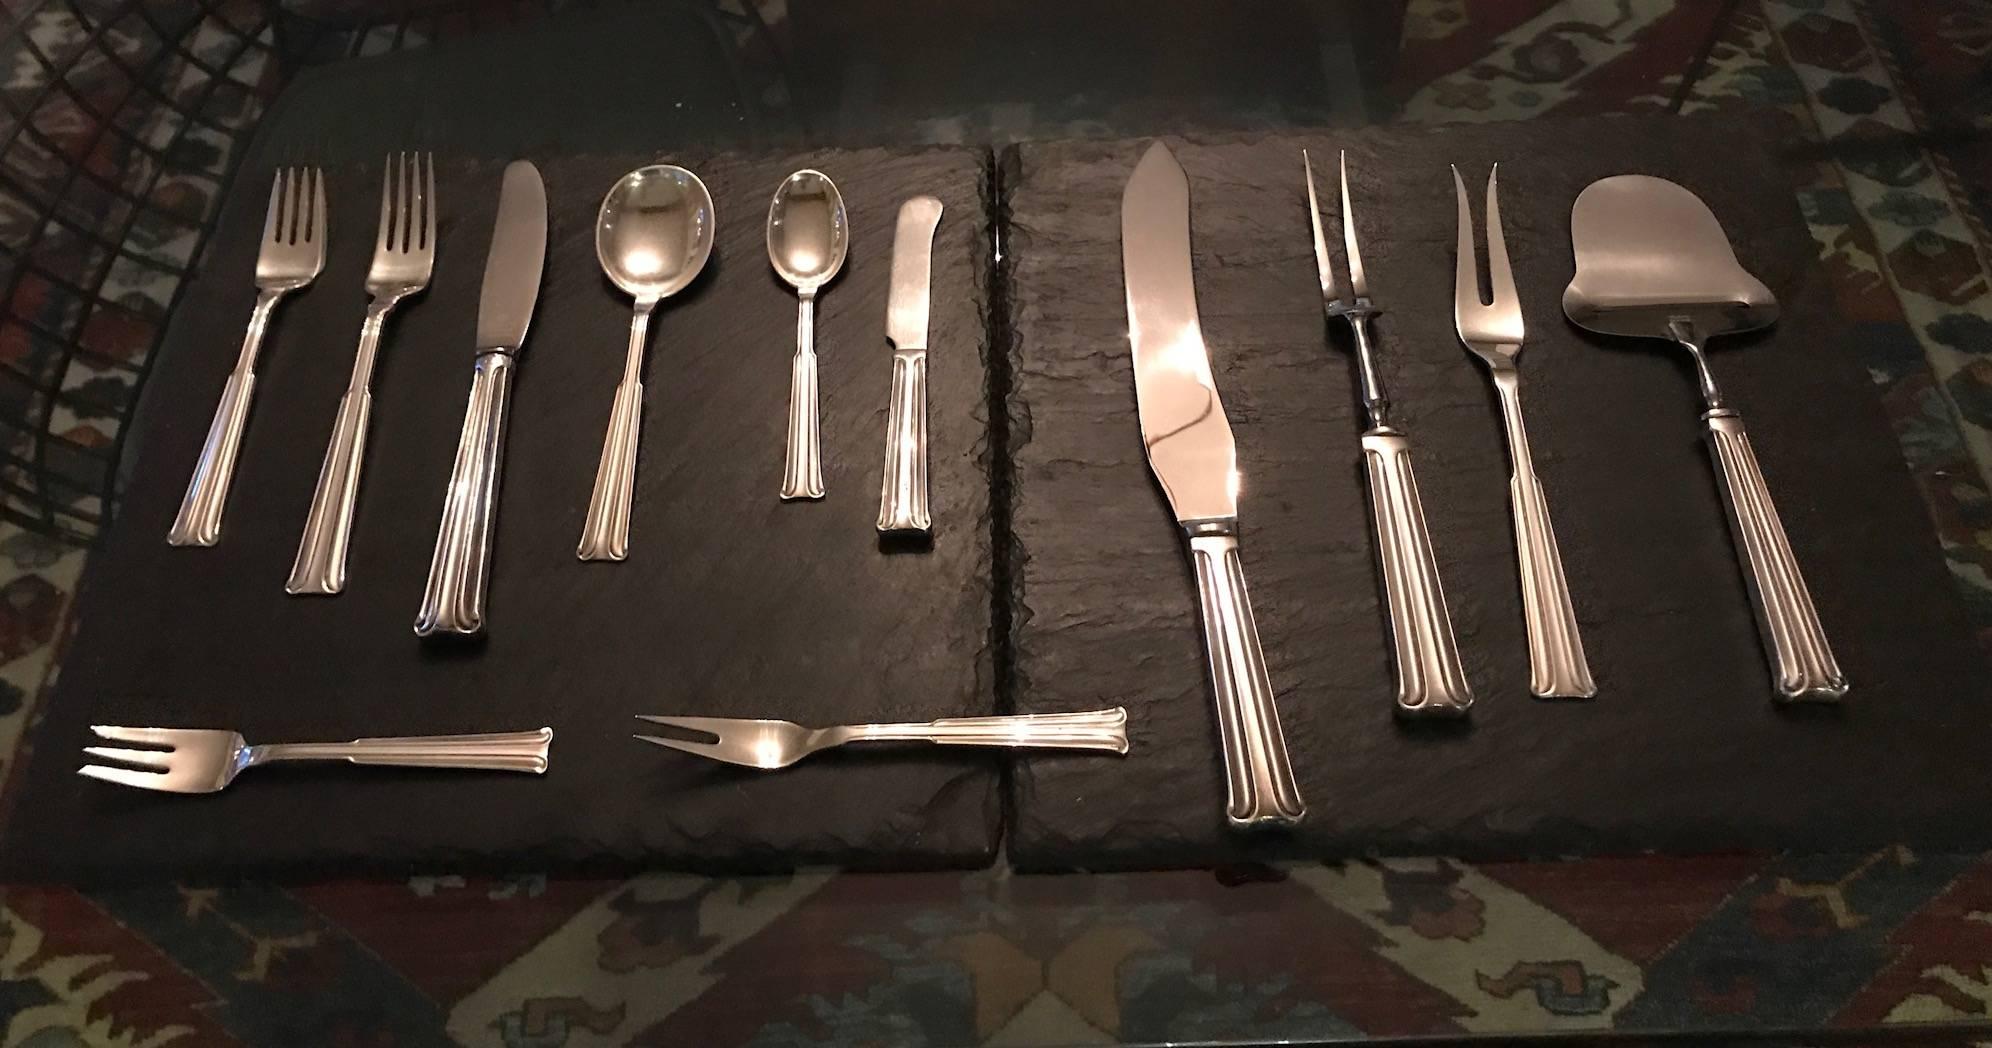 A large flatware set of 88 pieces from Denmark, circa 1960s, in a very elegant pattern, made by silversmith Orla Vagn Mogensen (1949-1975) who also designed for Georg Jensen
This comprehensive set is stunning in condition and all hallmarked as